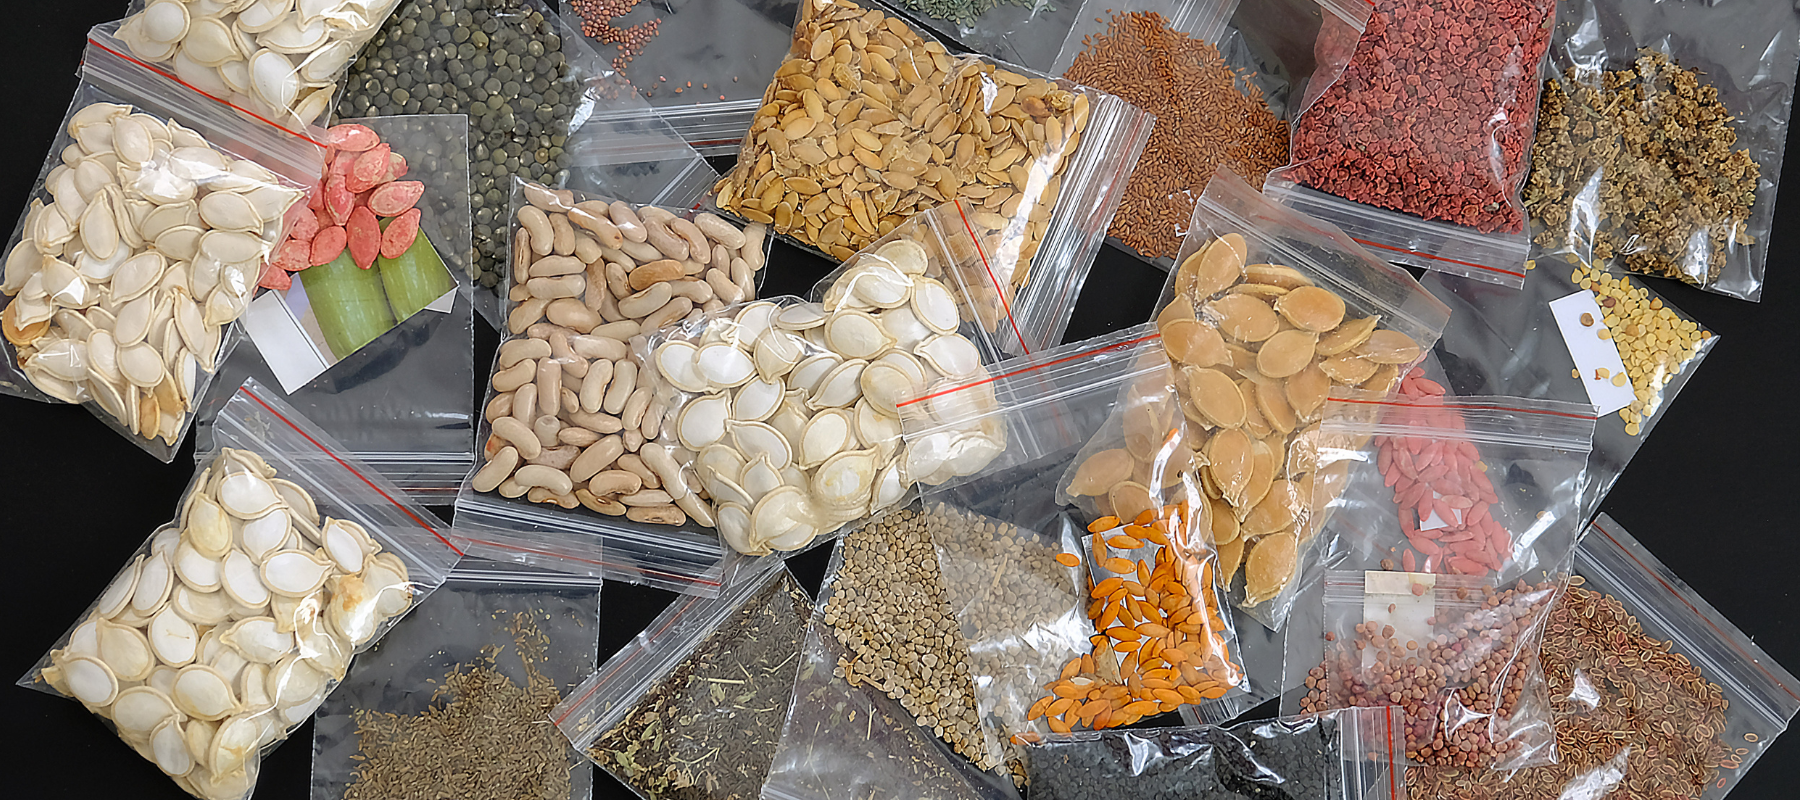 How to properly store seeds